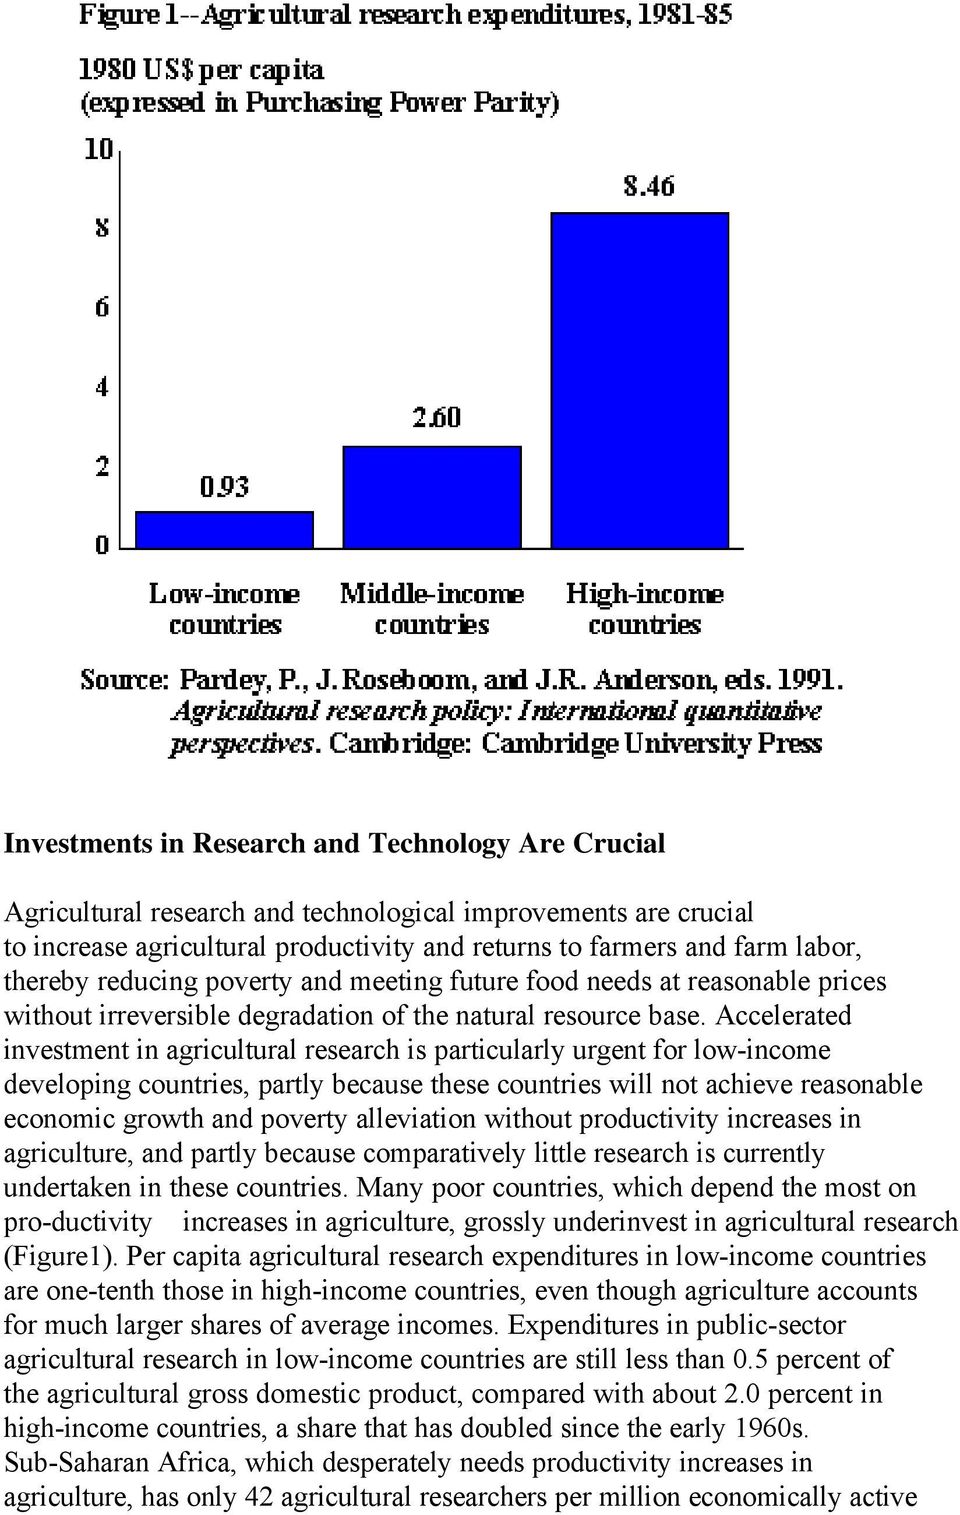 Accelerated investment in agricultural research is particularly urgent for low-income developing countries, partly because these countries will not achieve reasonable economic growth and poverty